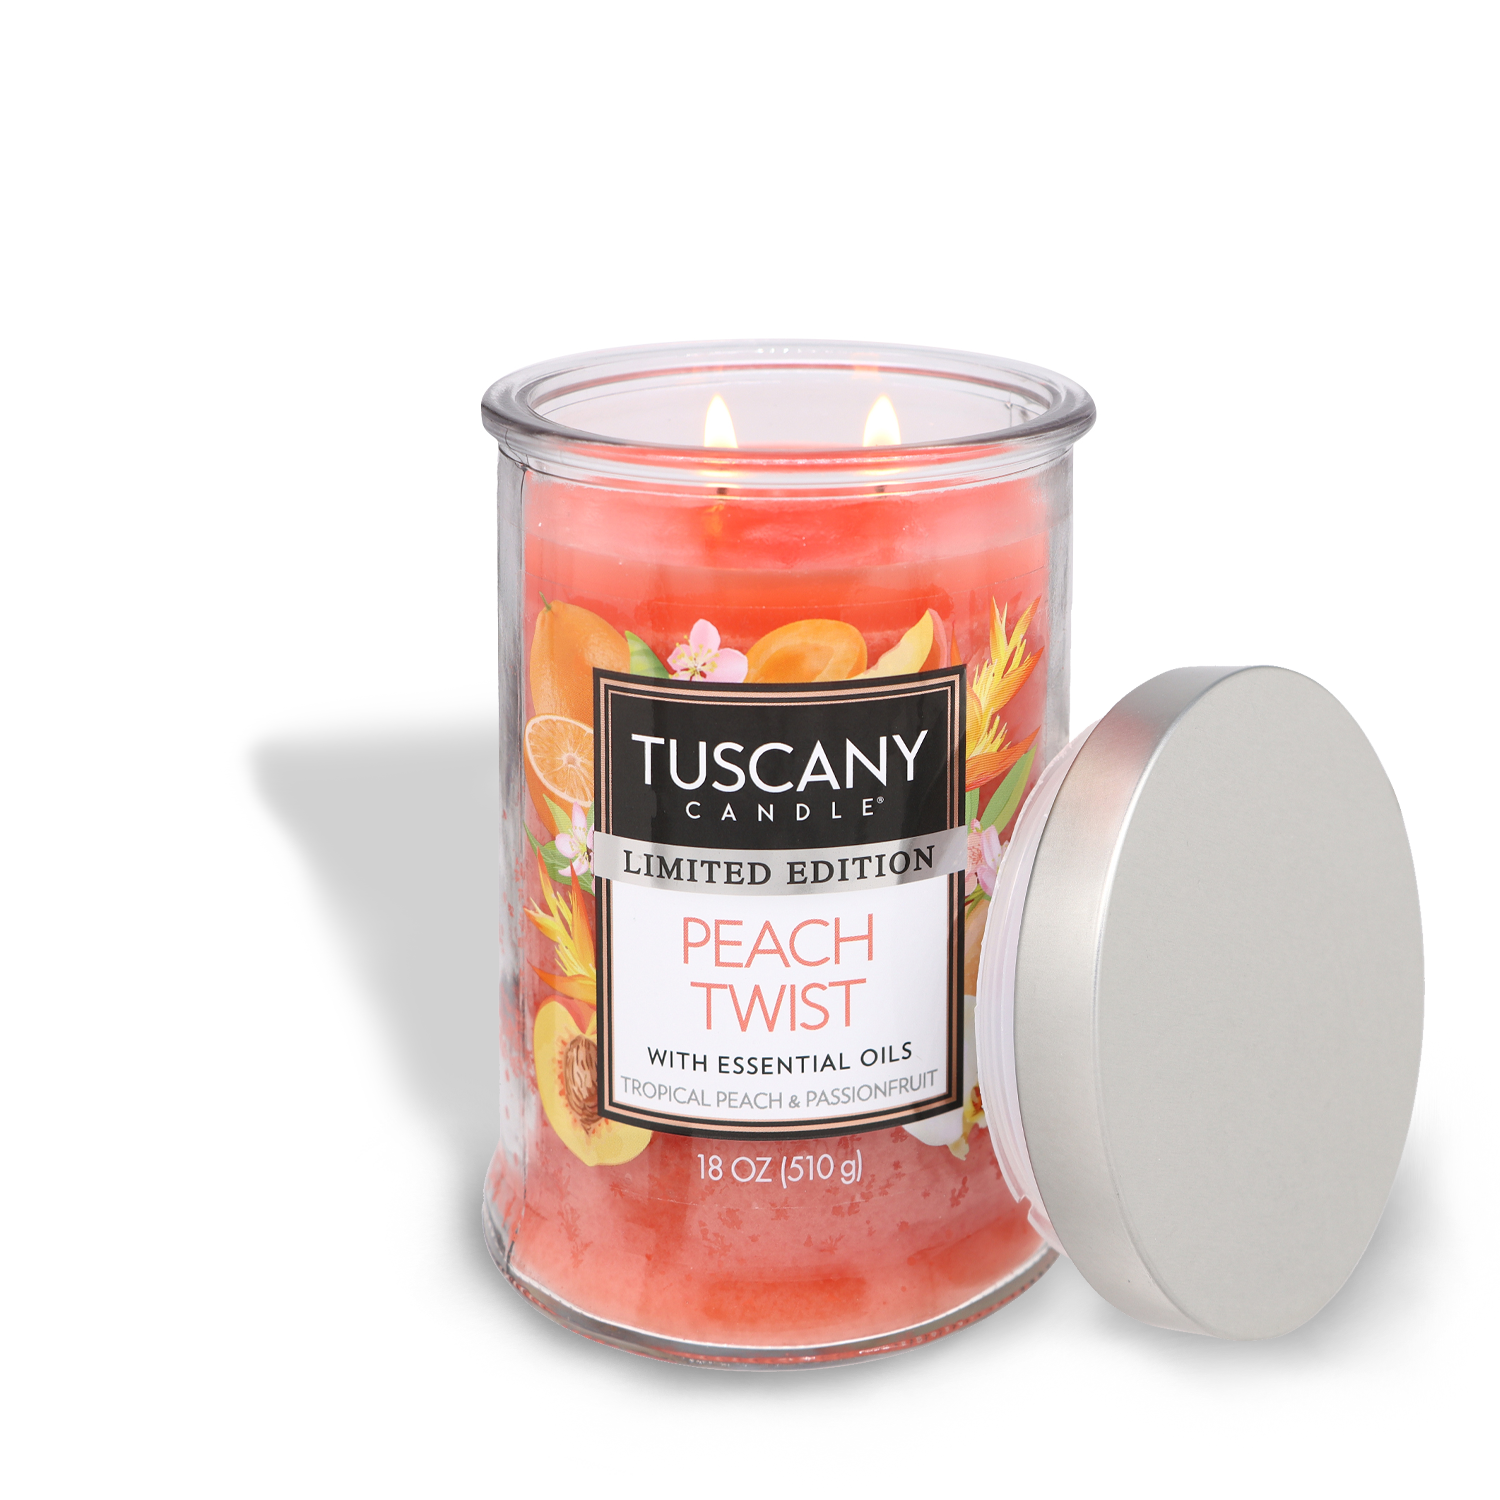 Explore the summer adventure of Tuscany with its Peach Twist Long-Lasting Scented Jar Candle (18 oz) by Tuscany Candle® SEASONAL.